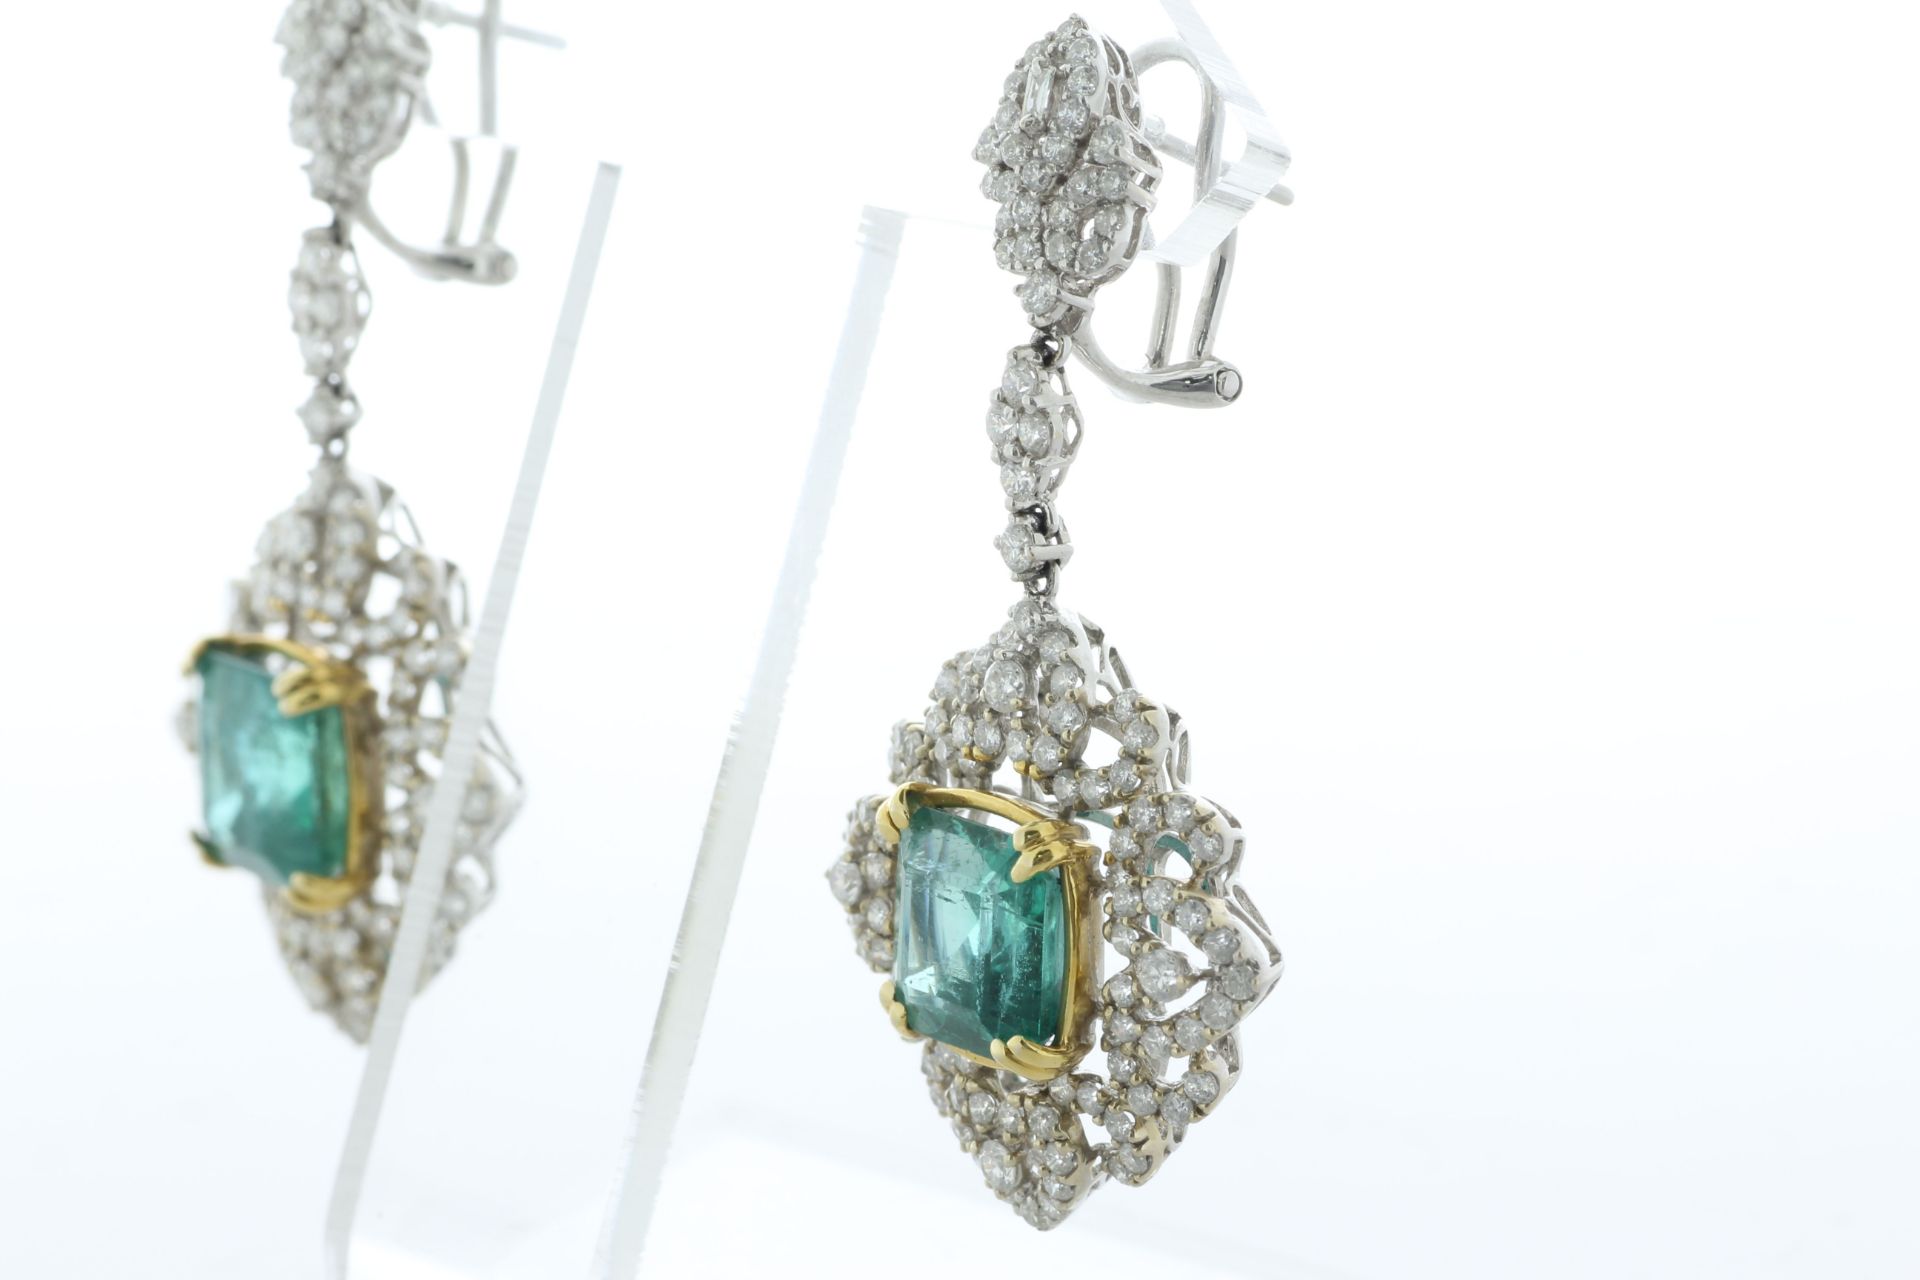 18ct White Gold Emerald Cluster Diamond And Emerald Earrings (E7.52) 3.01 Carats - Valued By IDI £ - Image 2 of 3